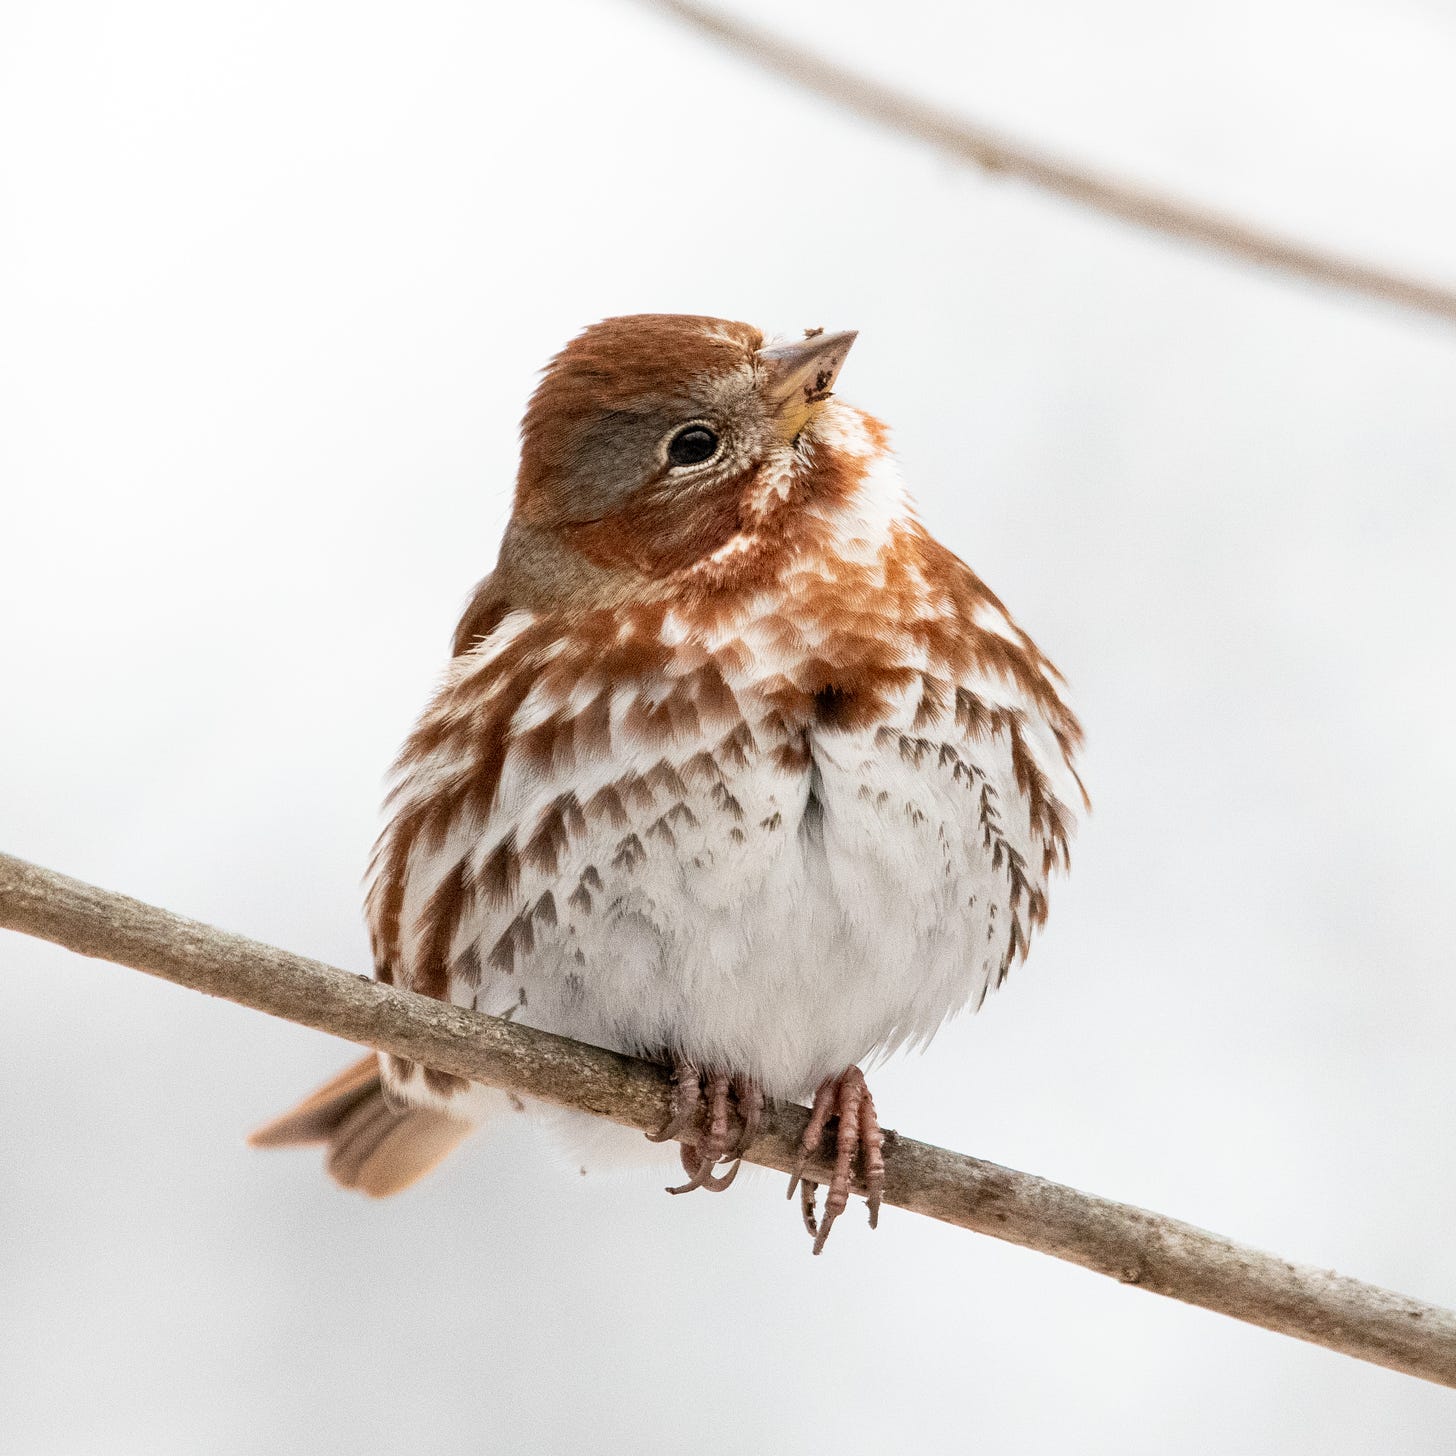 A vividly red fox sparrow perched on a slanting twig, its head cocked to one side as it looks upward